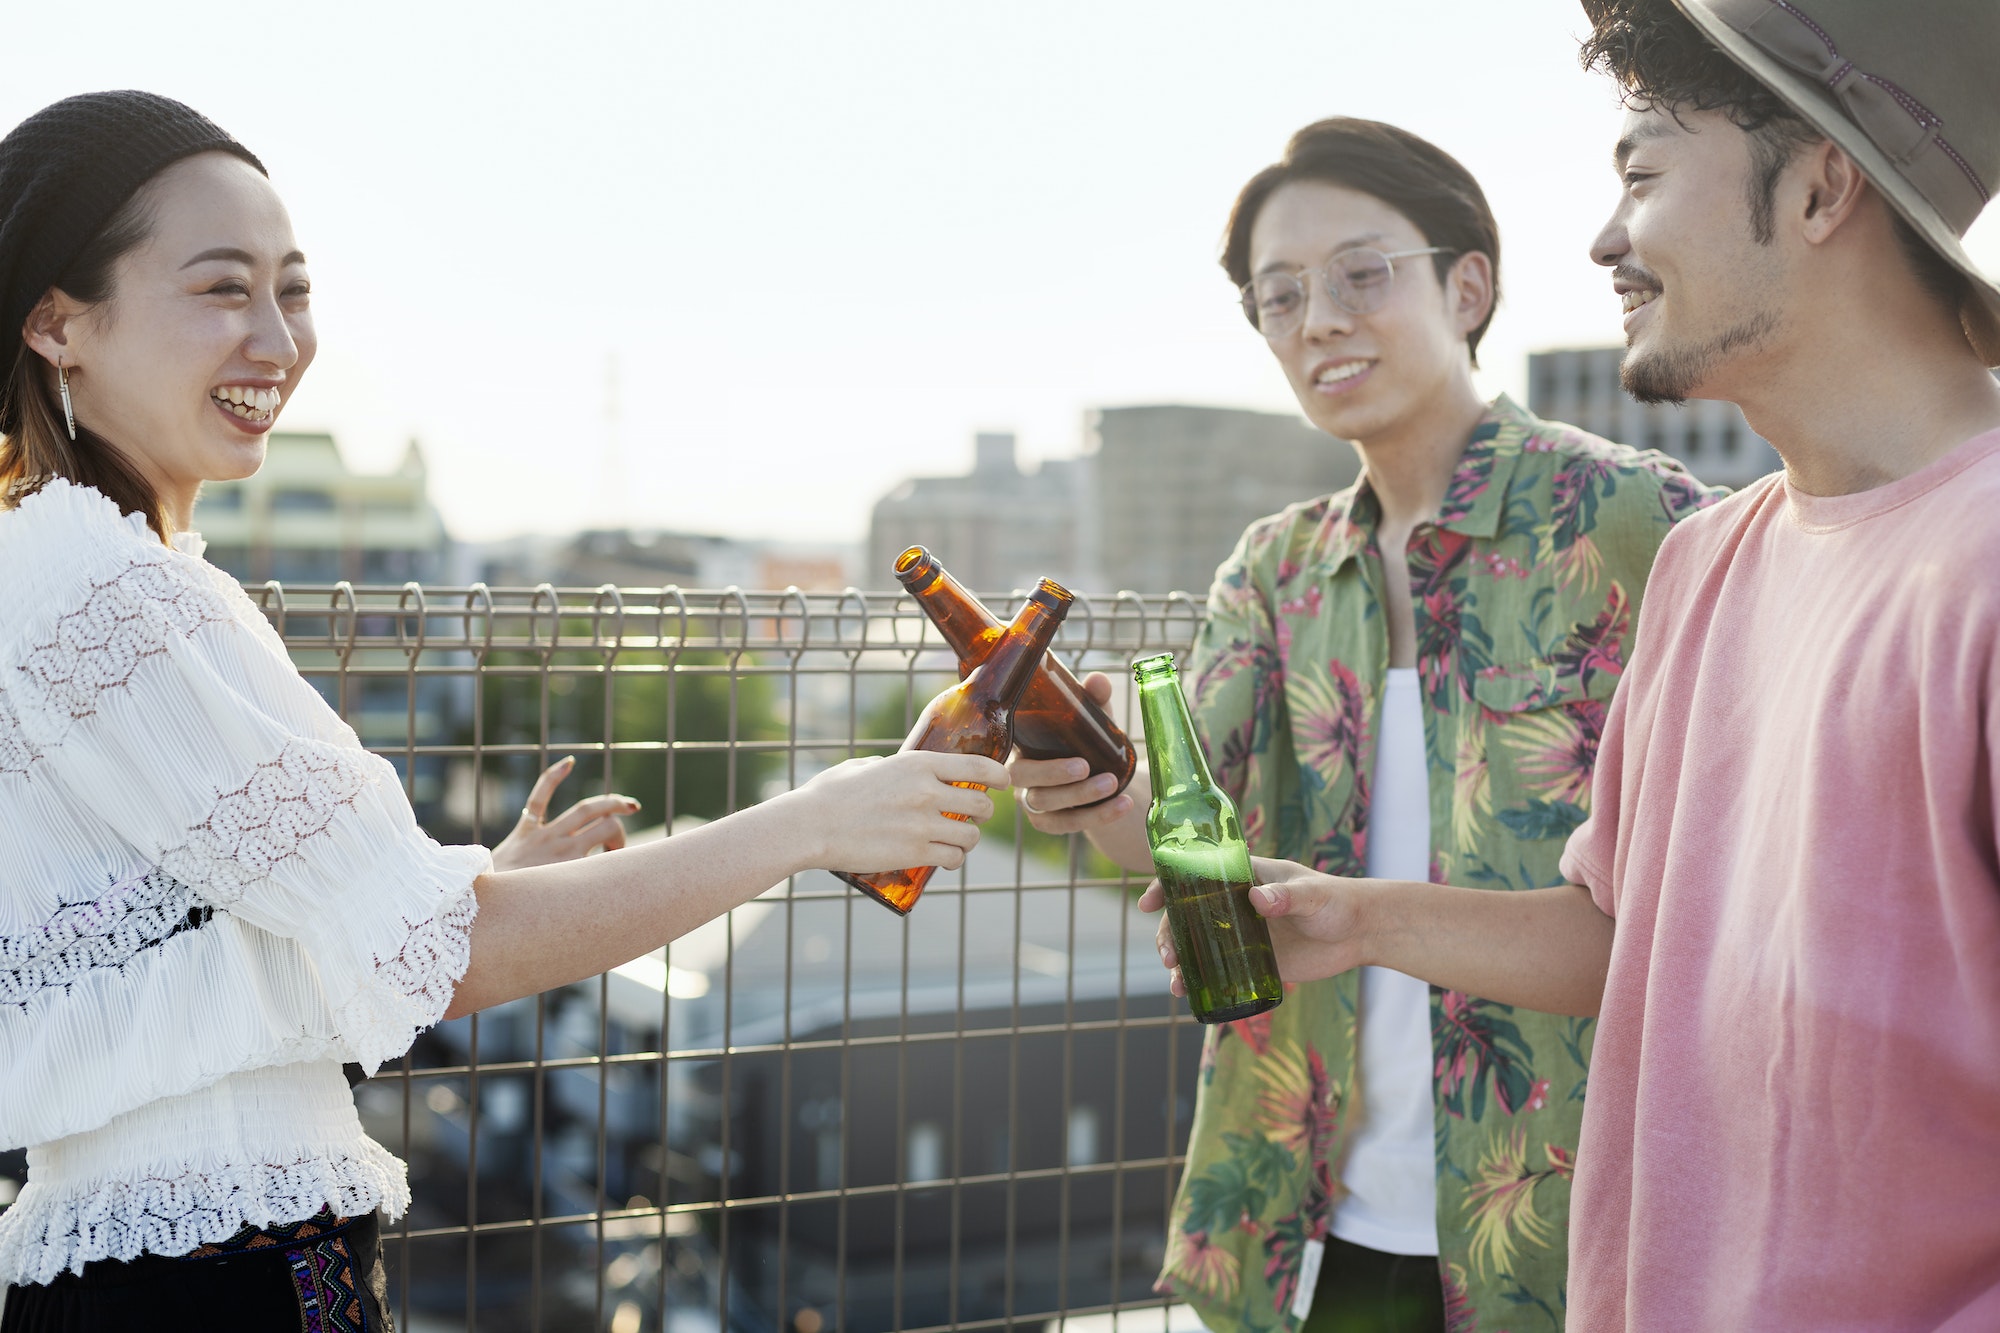 Young Japanese men and woman standing on a rooftop in an urban setting, drinking beer.